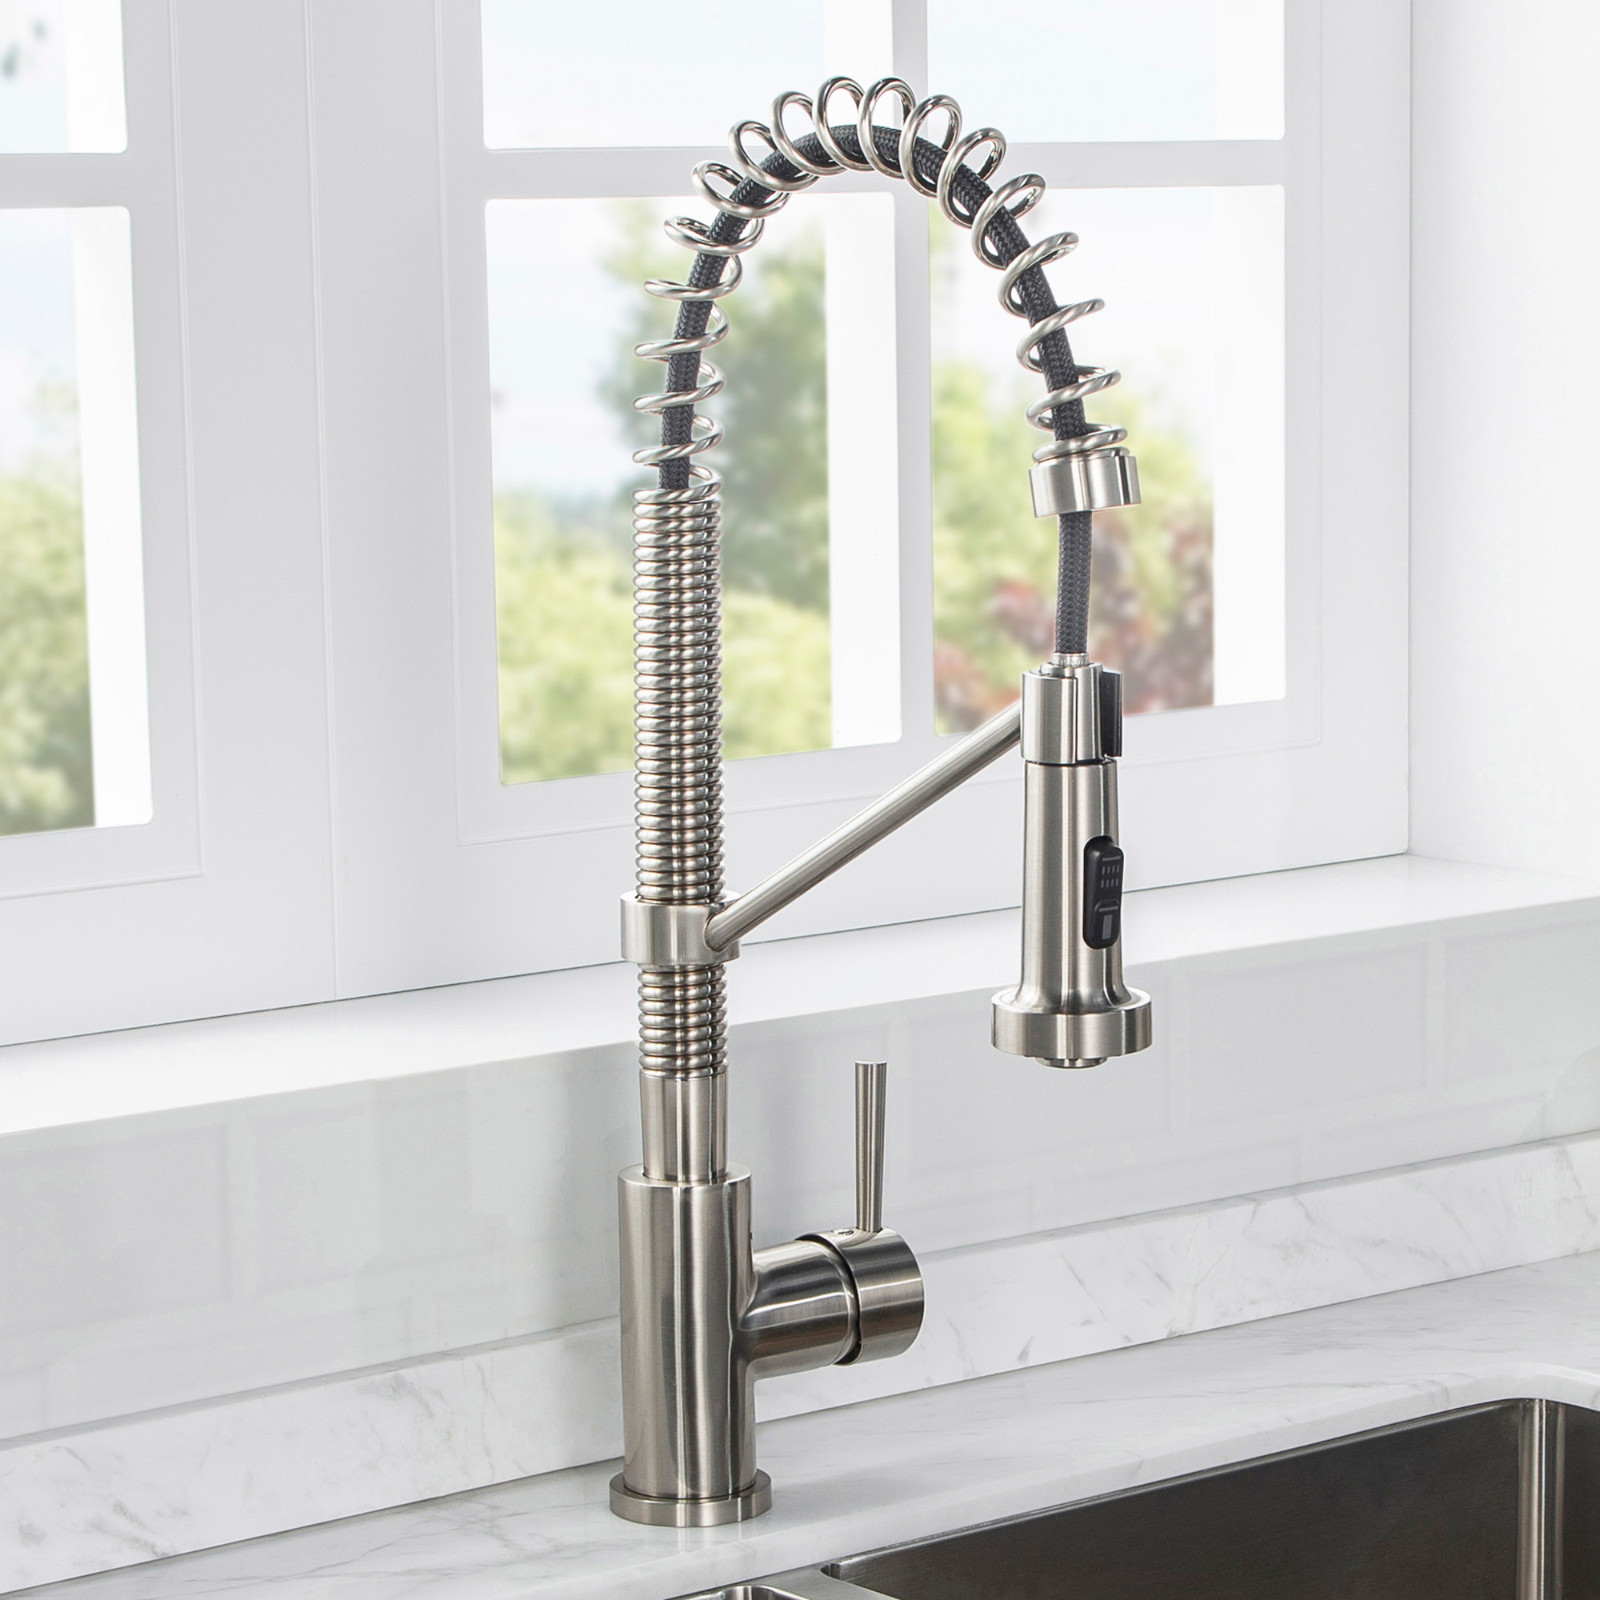  WOODBRIDGE WK010203BN Stainless Steel Single Handle Spring Coil Pre-Rinse Kitchen Faucet with Pull Down Sprayer, Brushed Nickel Finish_9466